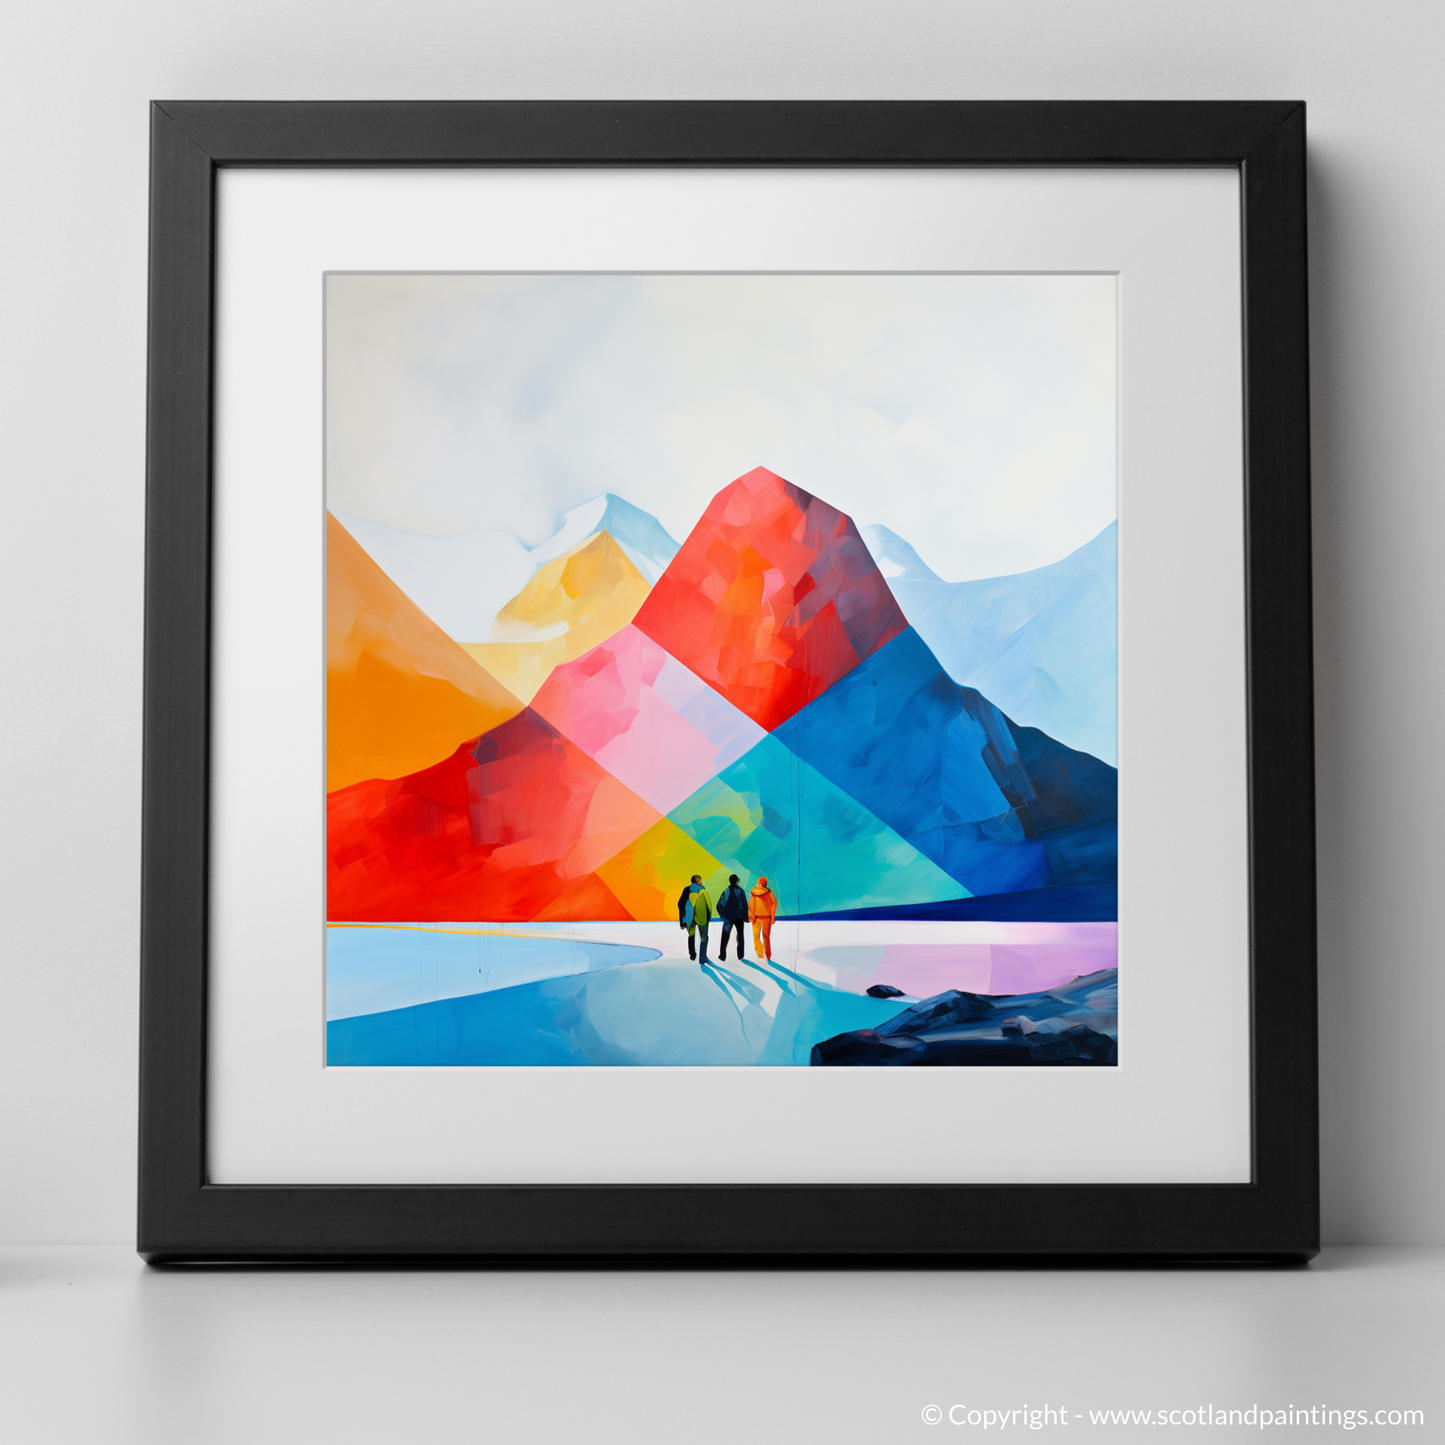 Art Print of Hikers in Glencoe with a black frame